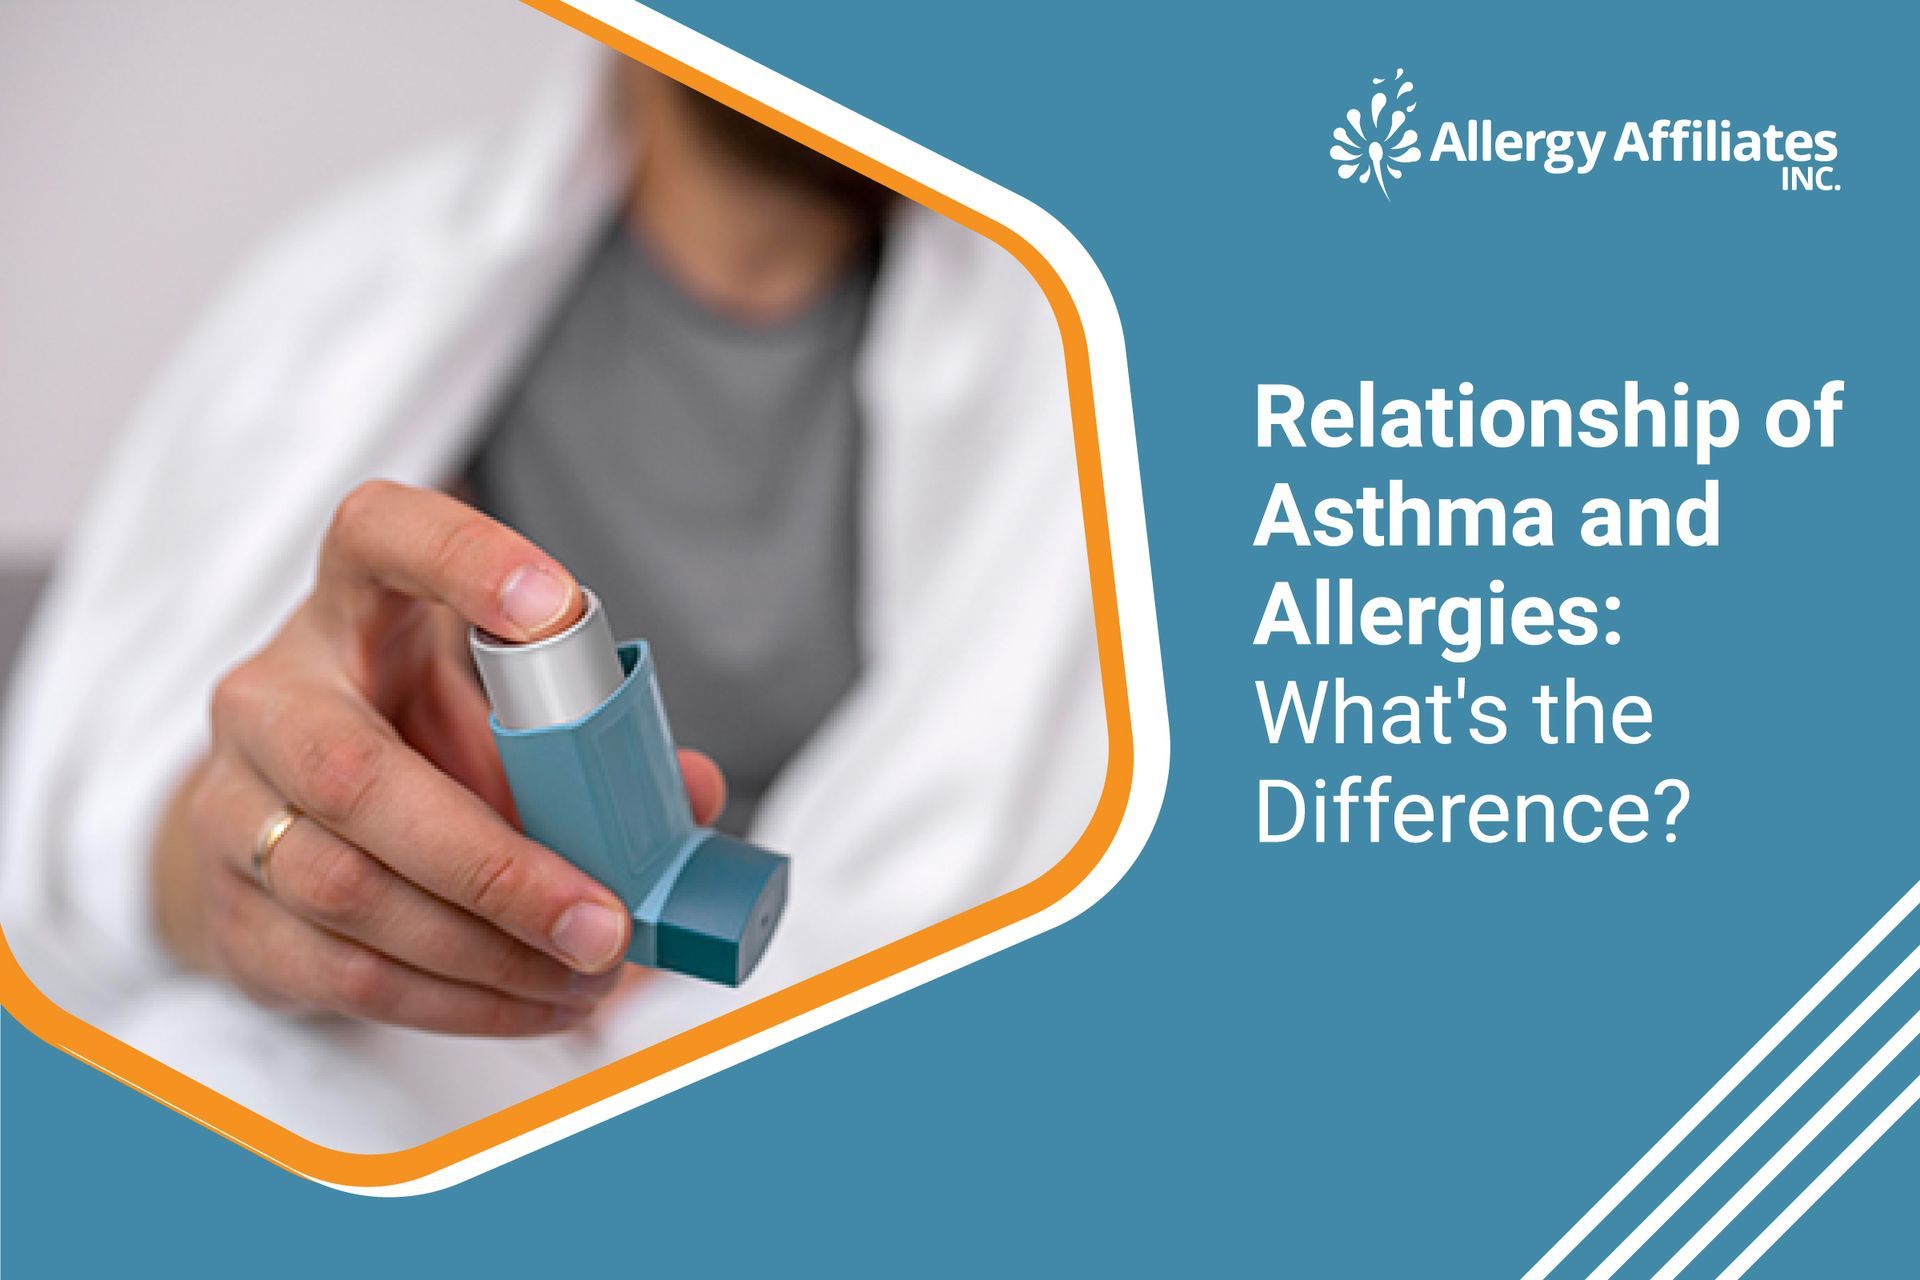 Relationship of Asthma and Allergies: What's the Difference?